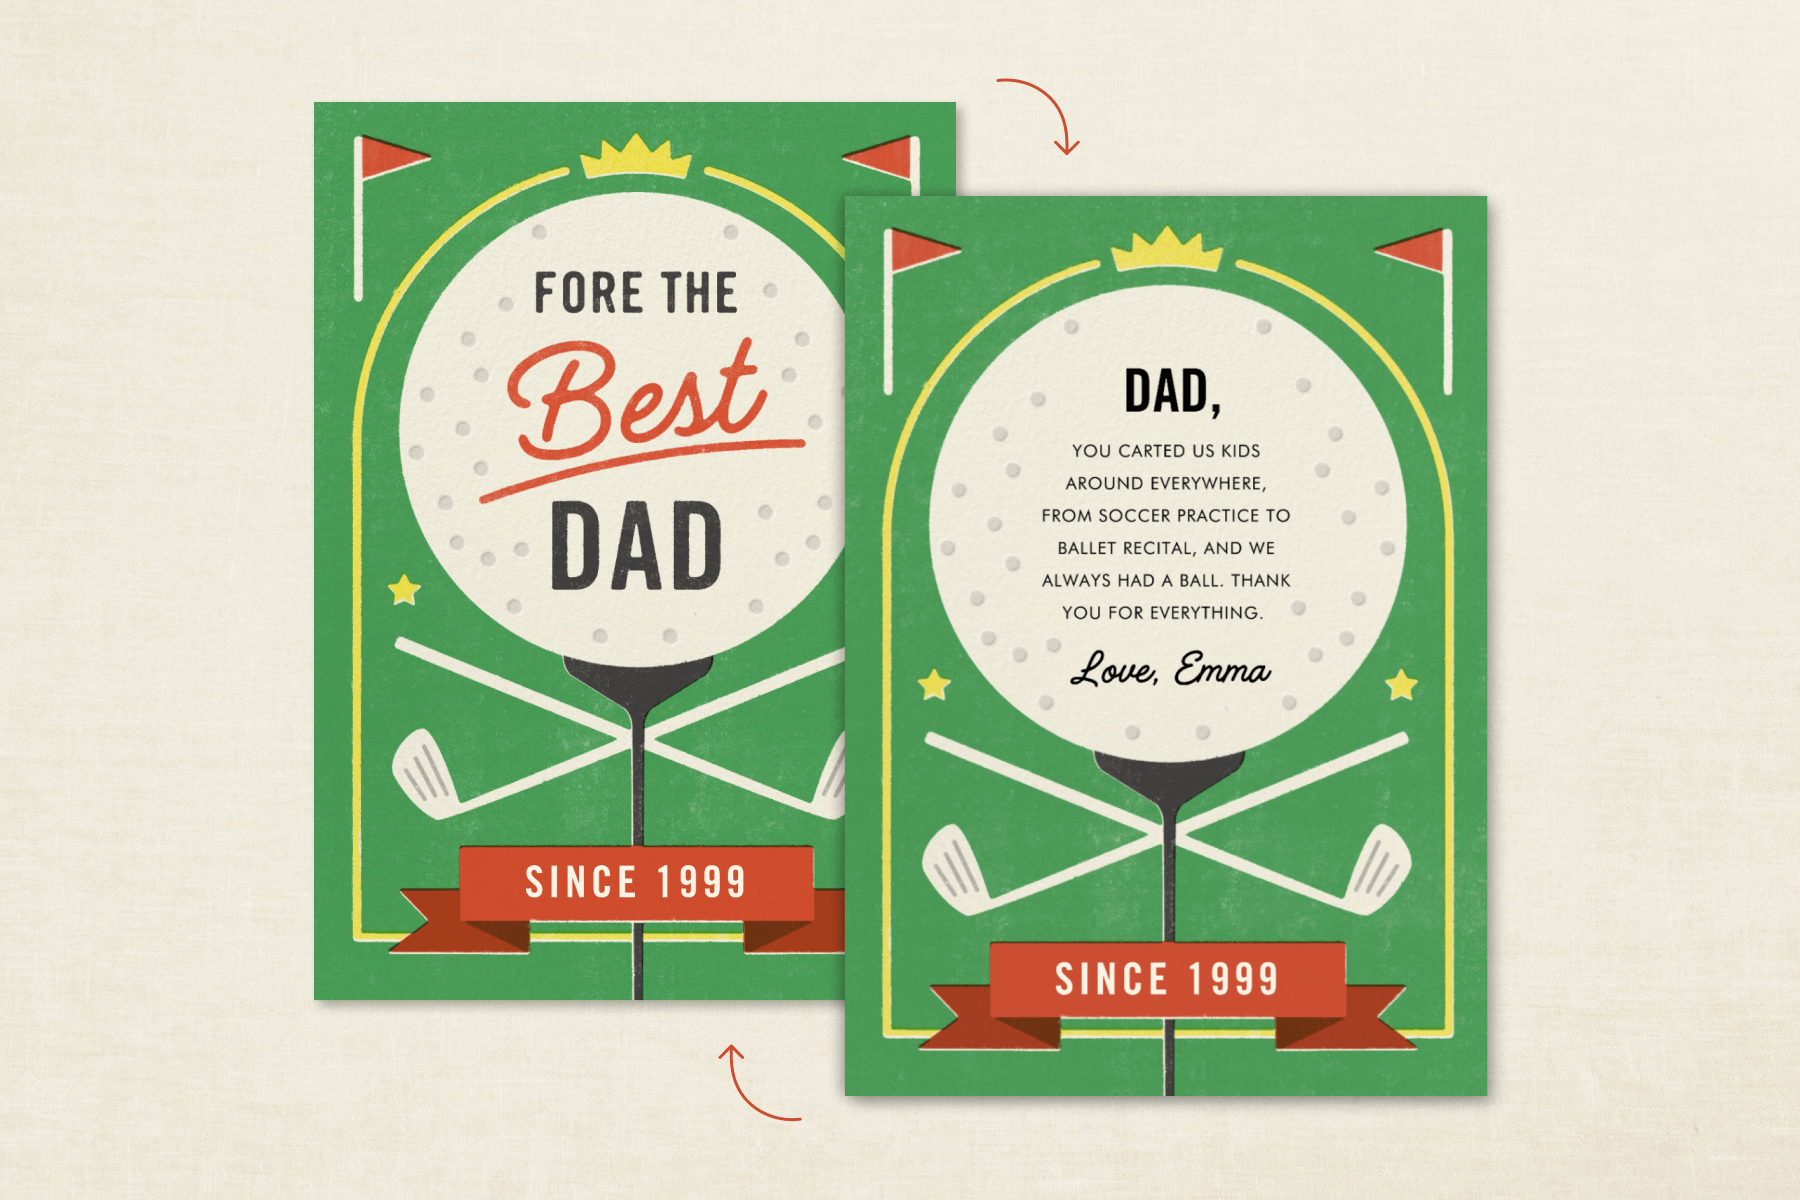 A Father’s Day card featuring an illustration of golf motifs with the words “Fore the best dad since 1999” on the golf ball. The back of the card is also shown with a sample message also listed in the suggestions below.